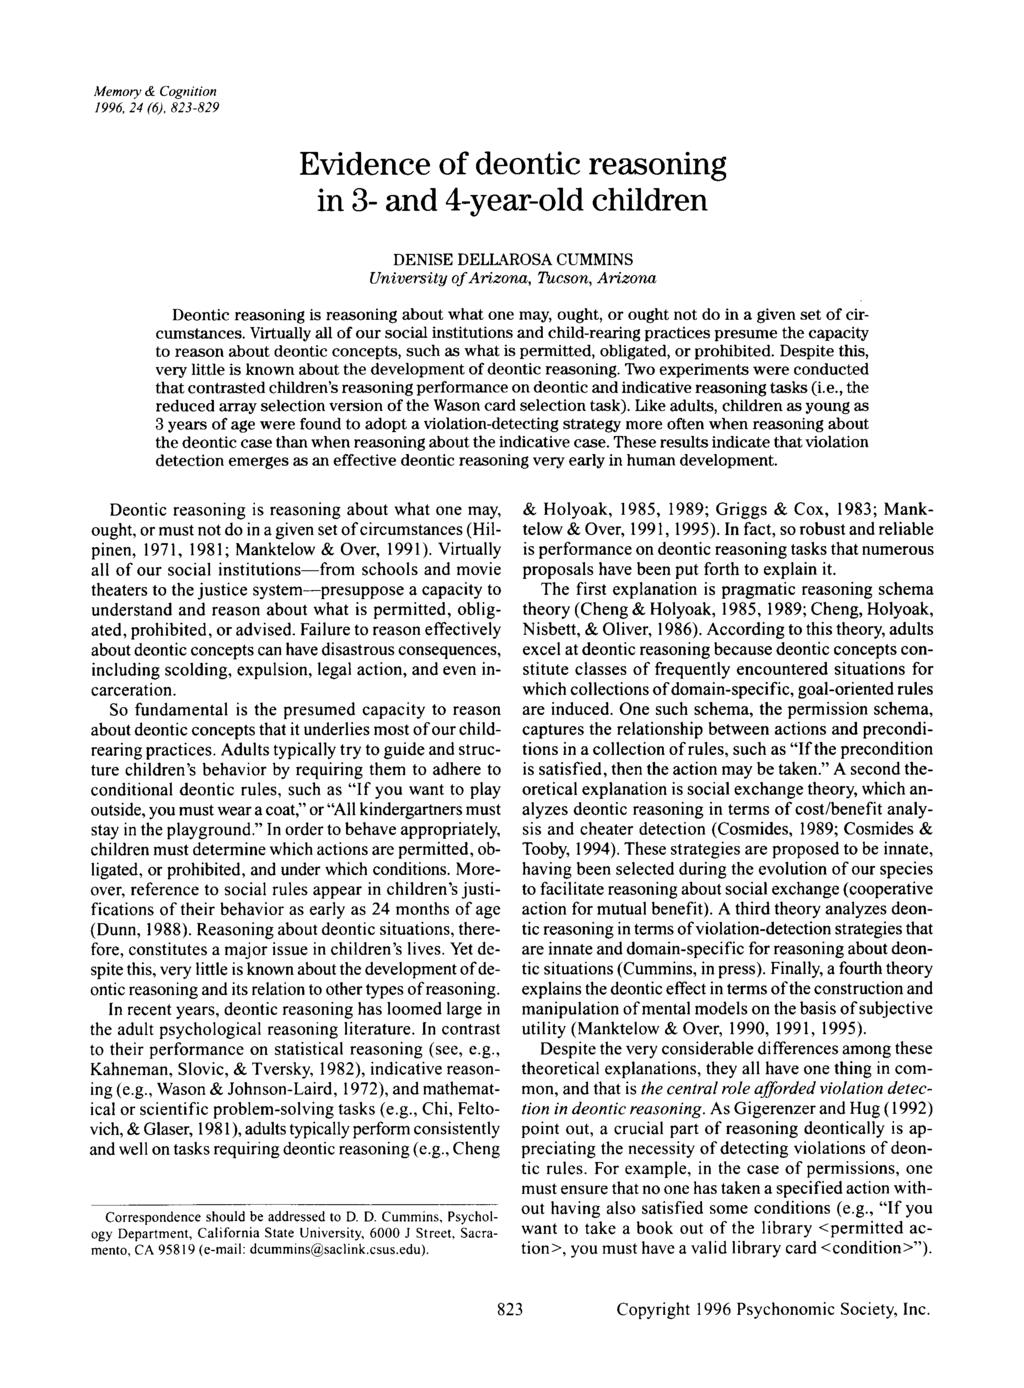 Memory & Cogitio 1996, 24 (6), 823-829 Evidece of deotic reasoig i 3- ad 4-year-old childre DENISE DELL<\ROSA CUMMINS Uiversity ofarizoa, Tucso, Arizoa Deotic reasoig is reasoig about what oe may,